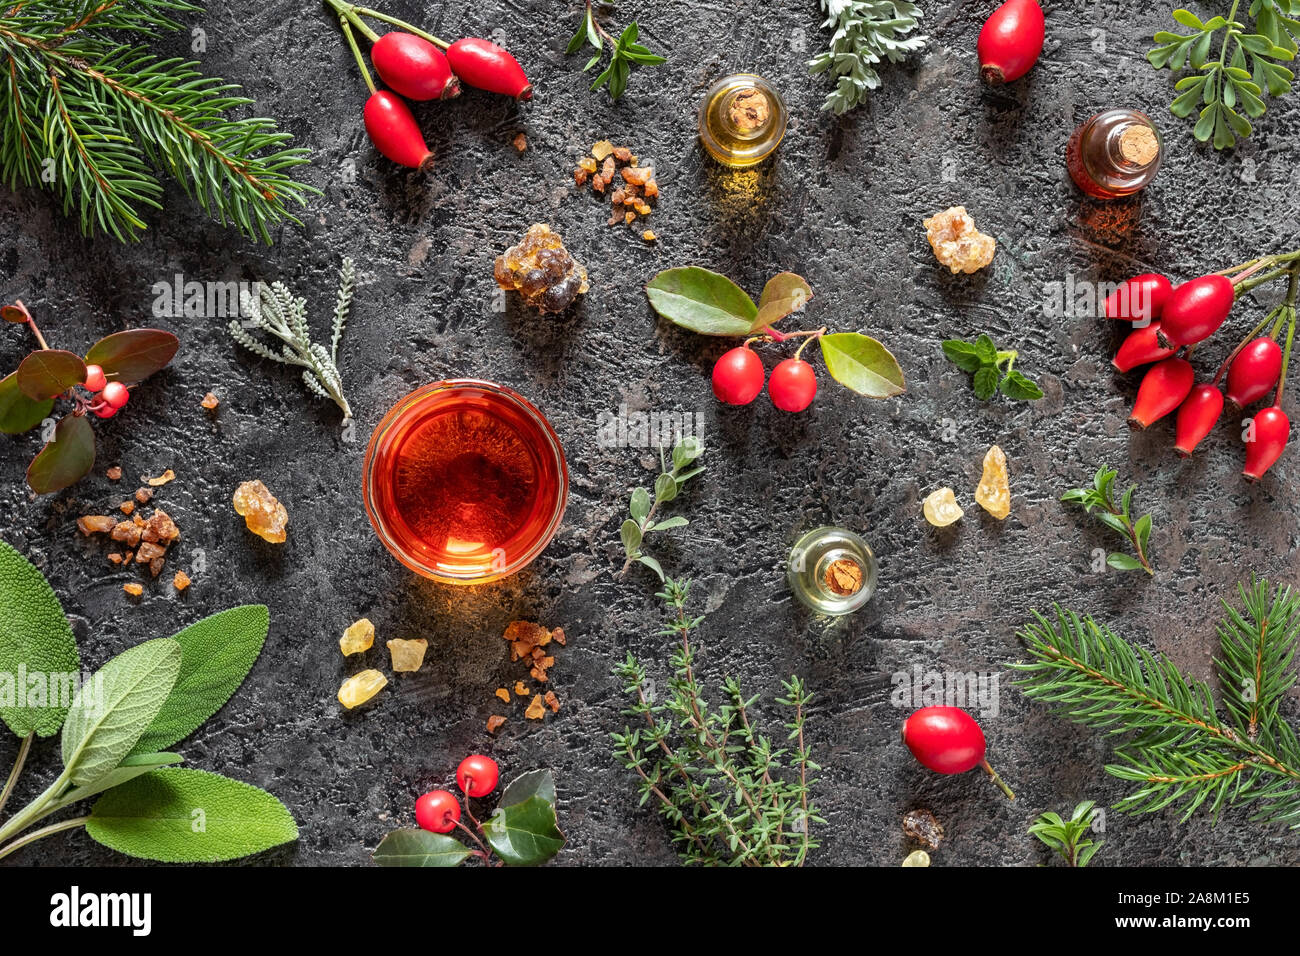 Bottles of essential oil with frankincense, myrrh, wintergreen, santolina and other herbs on a dark background Stock Photo